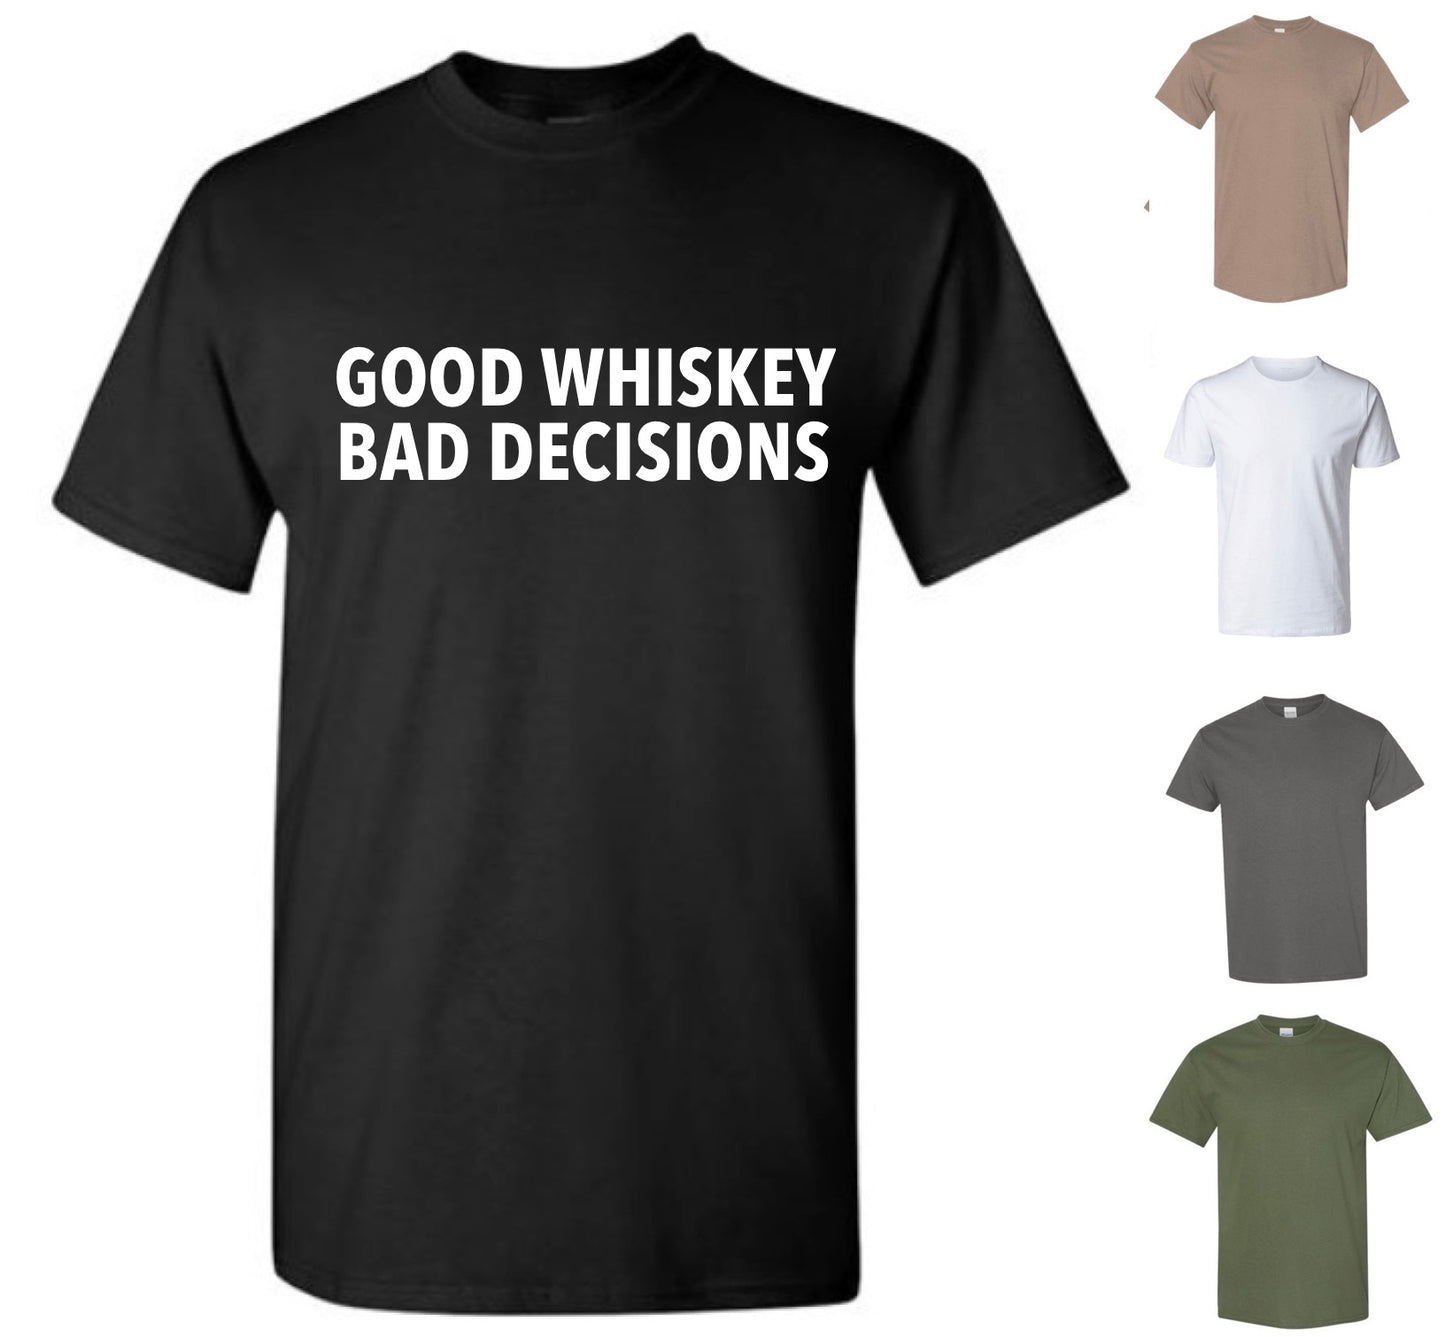 Good Whiskey Bad Decisions (FREE Shipping)